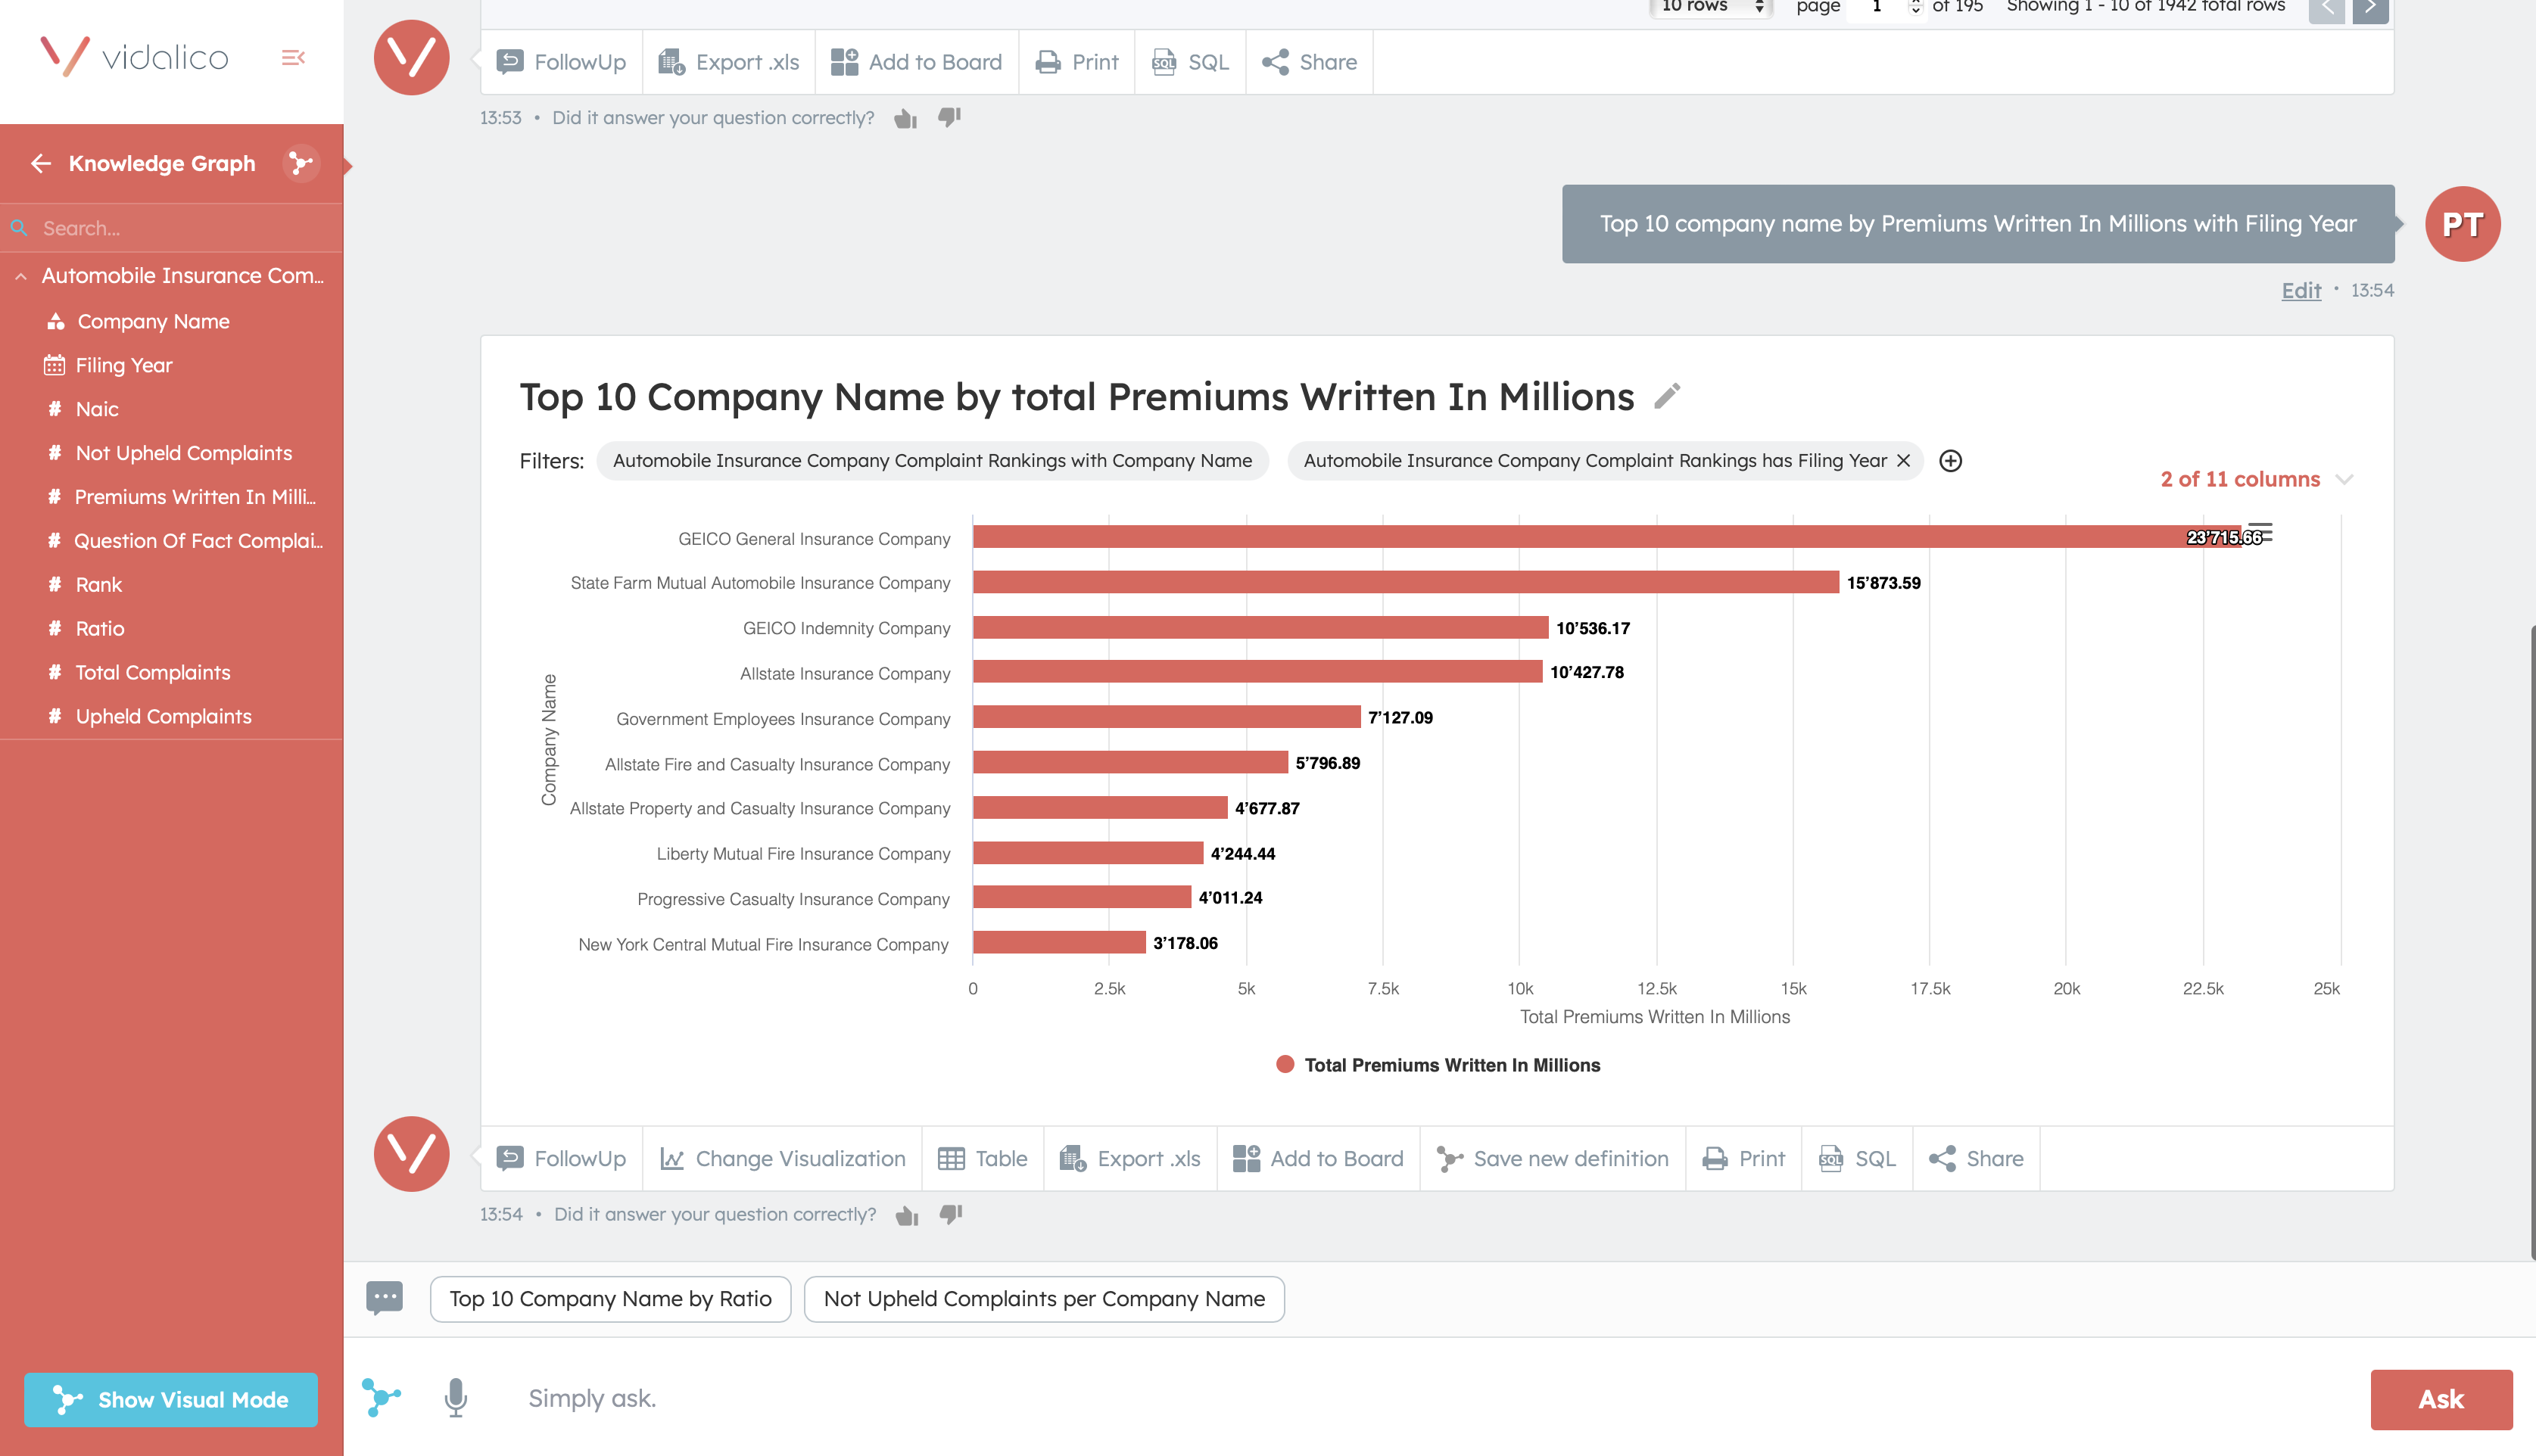 Chat with your Data - Data Insights for Insurance Companies